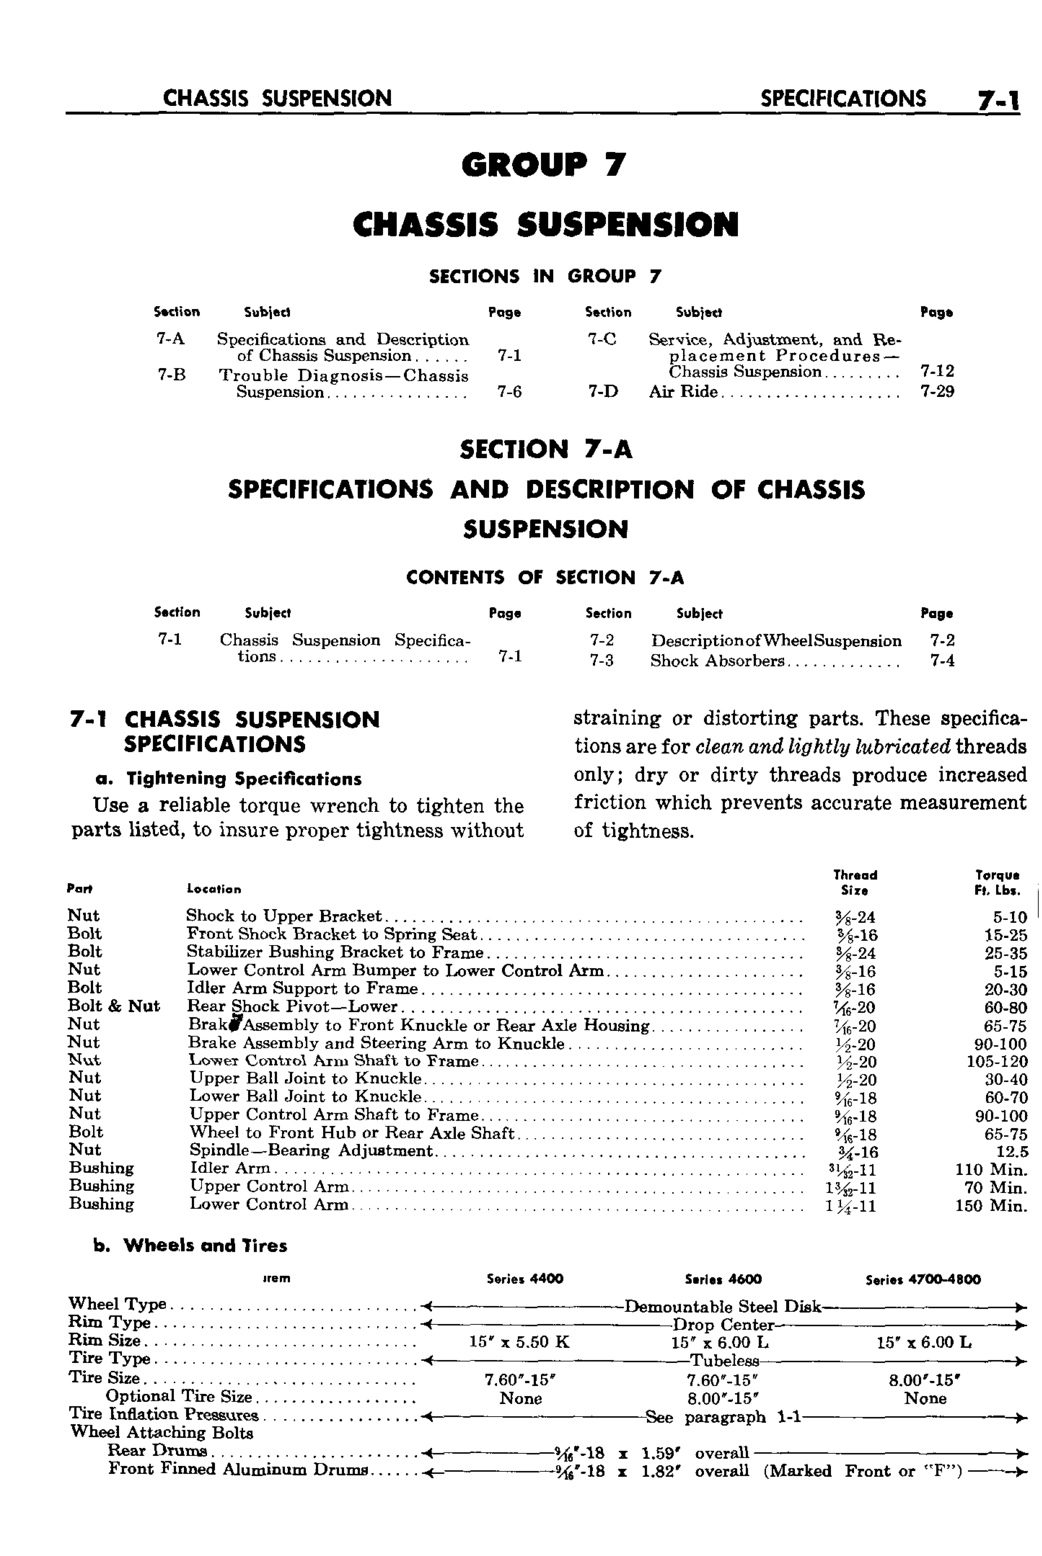 n_08 1959 Buick Shop Manual - Chassis Suspension-001-001.jpg